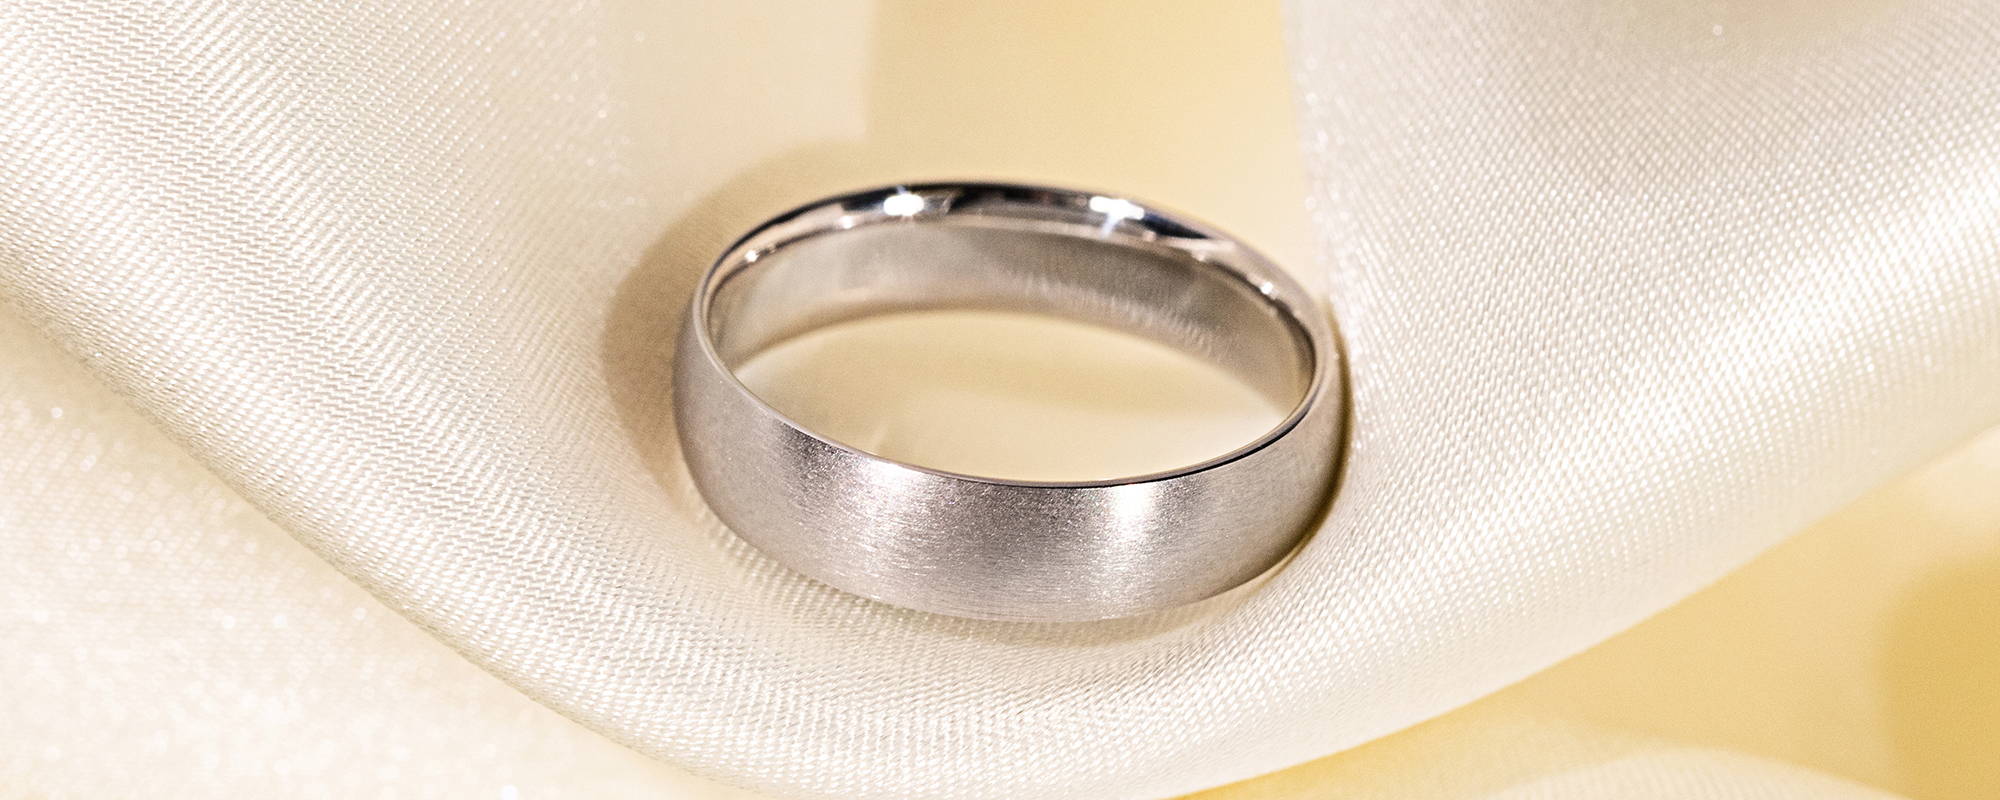 Top 5 Best Selling Wedding Bands Under 500